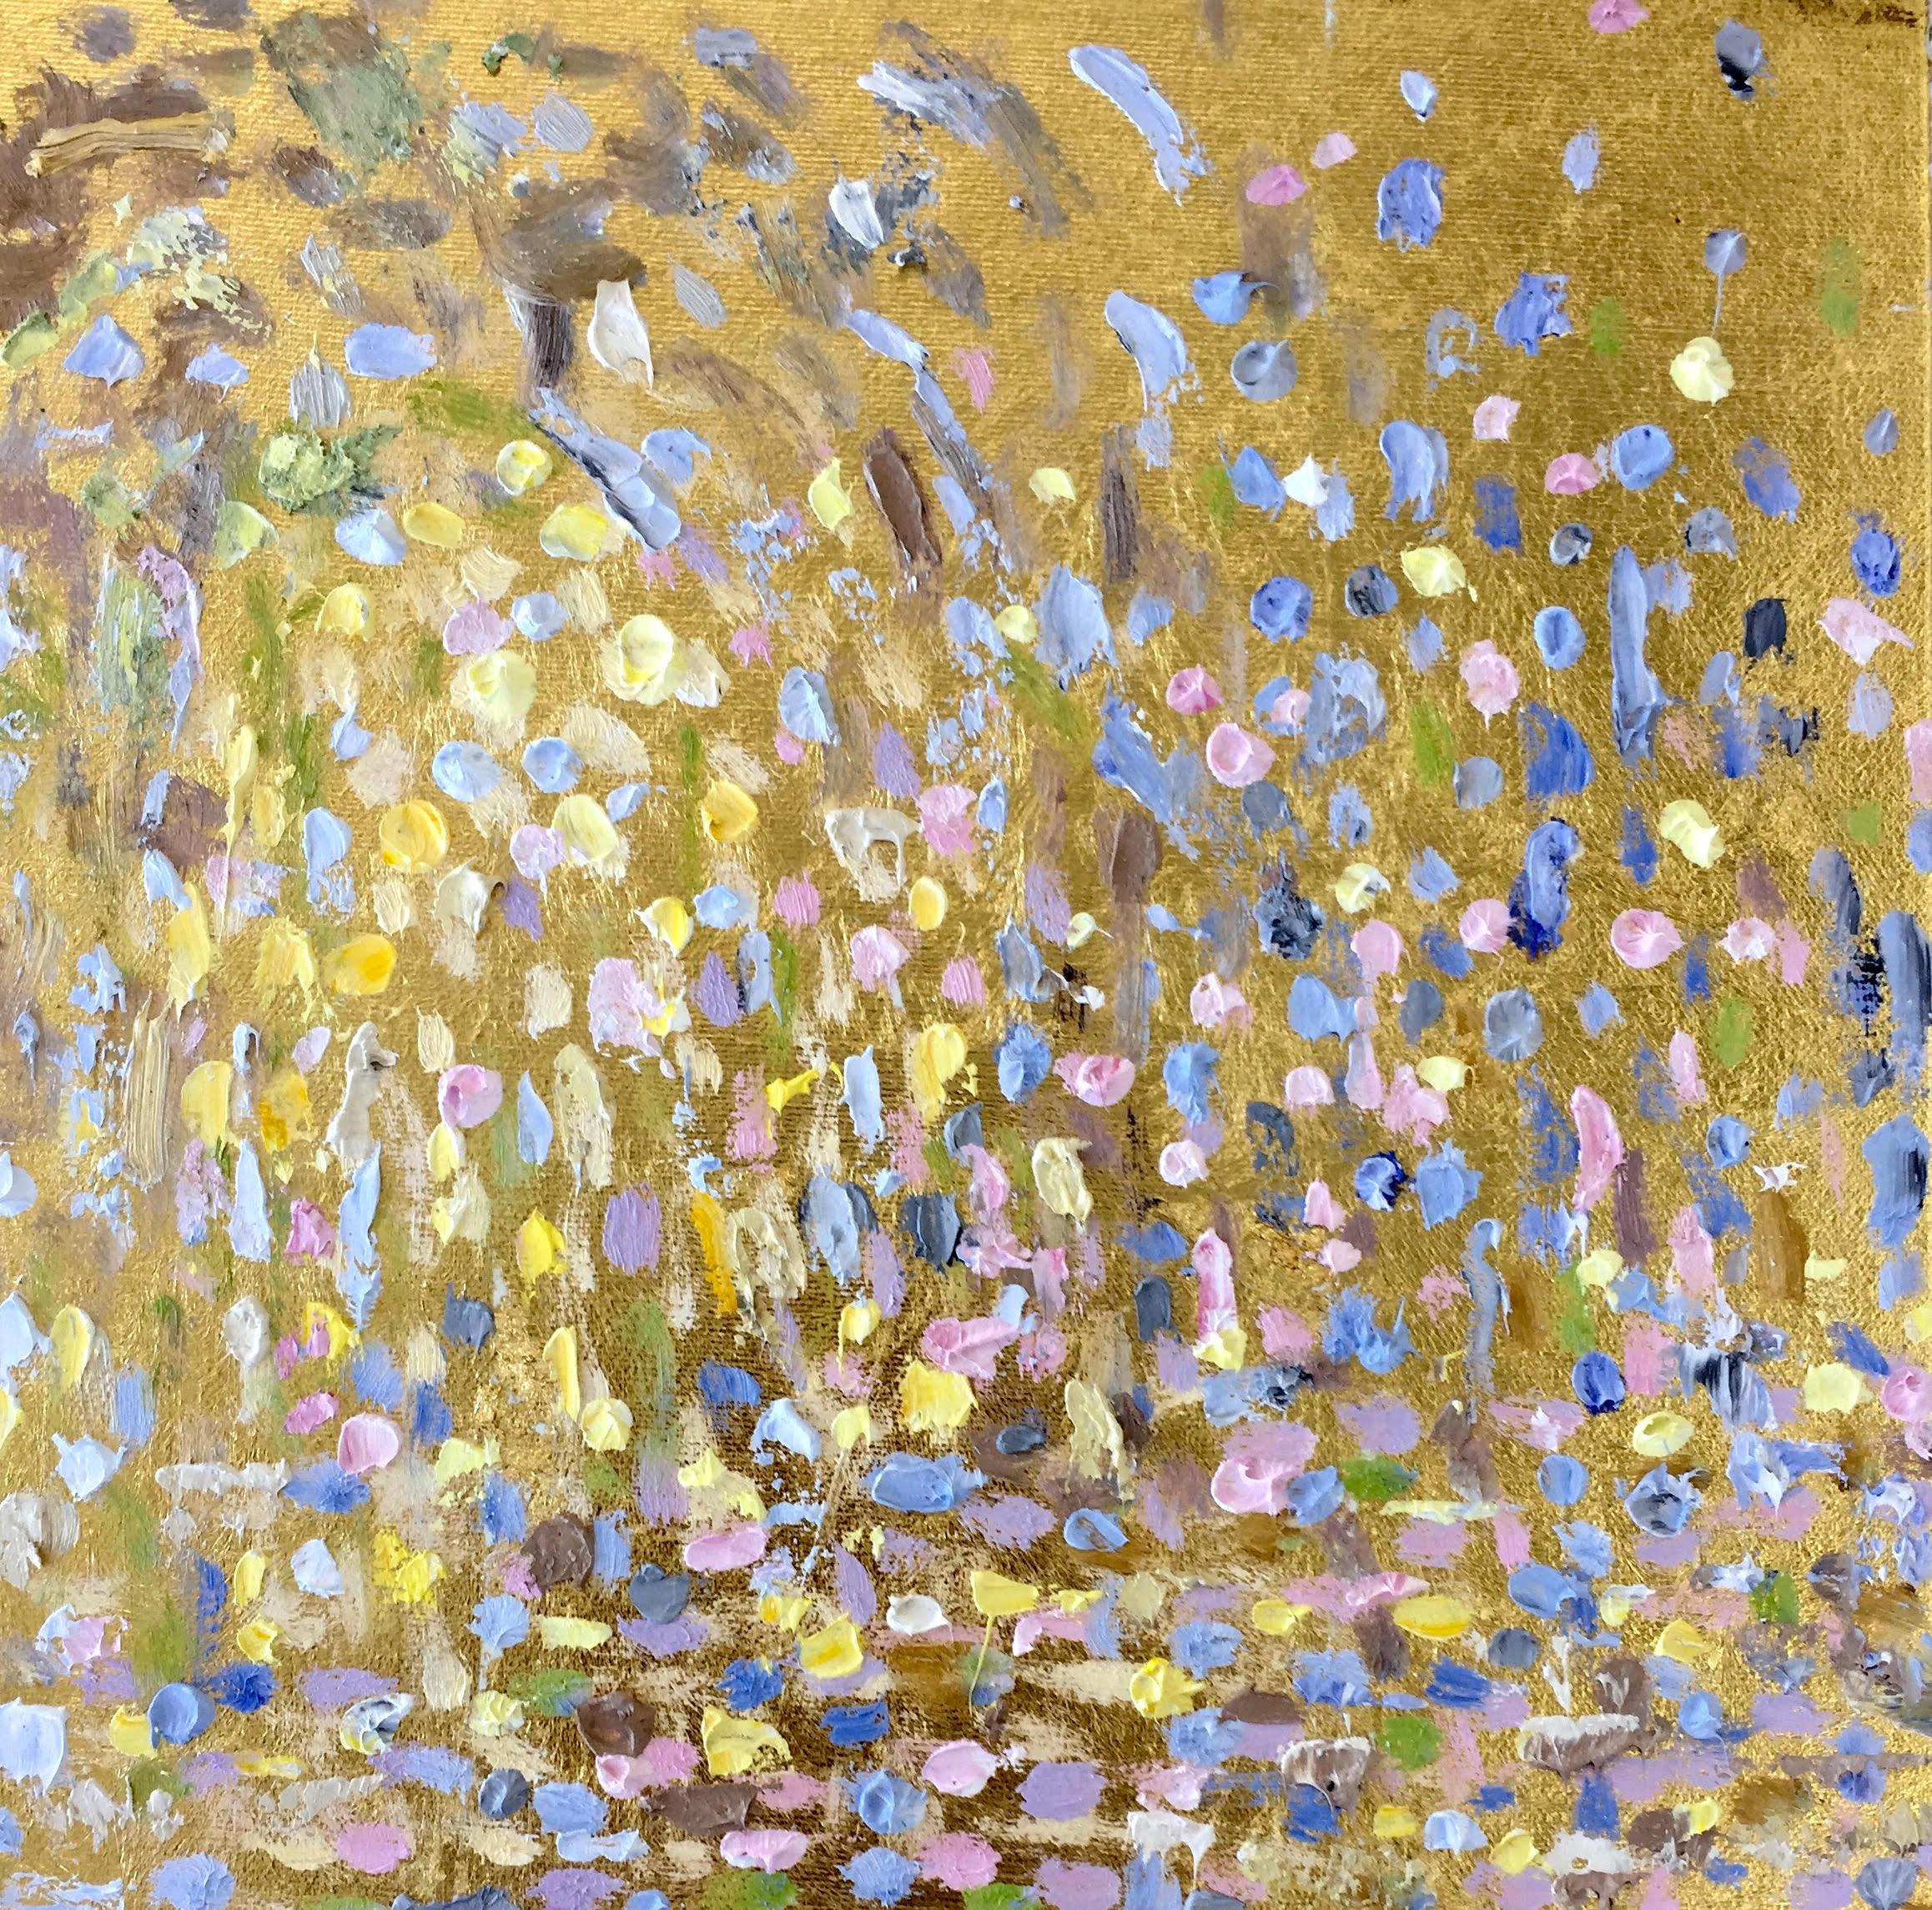 'Arrival' 2016 by Michelle Sakhai. Oil and metal leaf on canvas, 12 x 12 in. An abstract painting with reflective textured paint on a striking gold leaf background. A dramatic dimensional painting with colors in yellow, lavender, pink, green, blue,